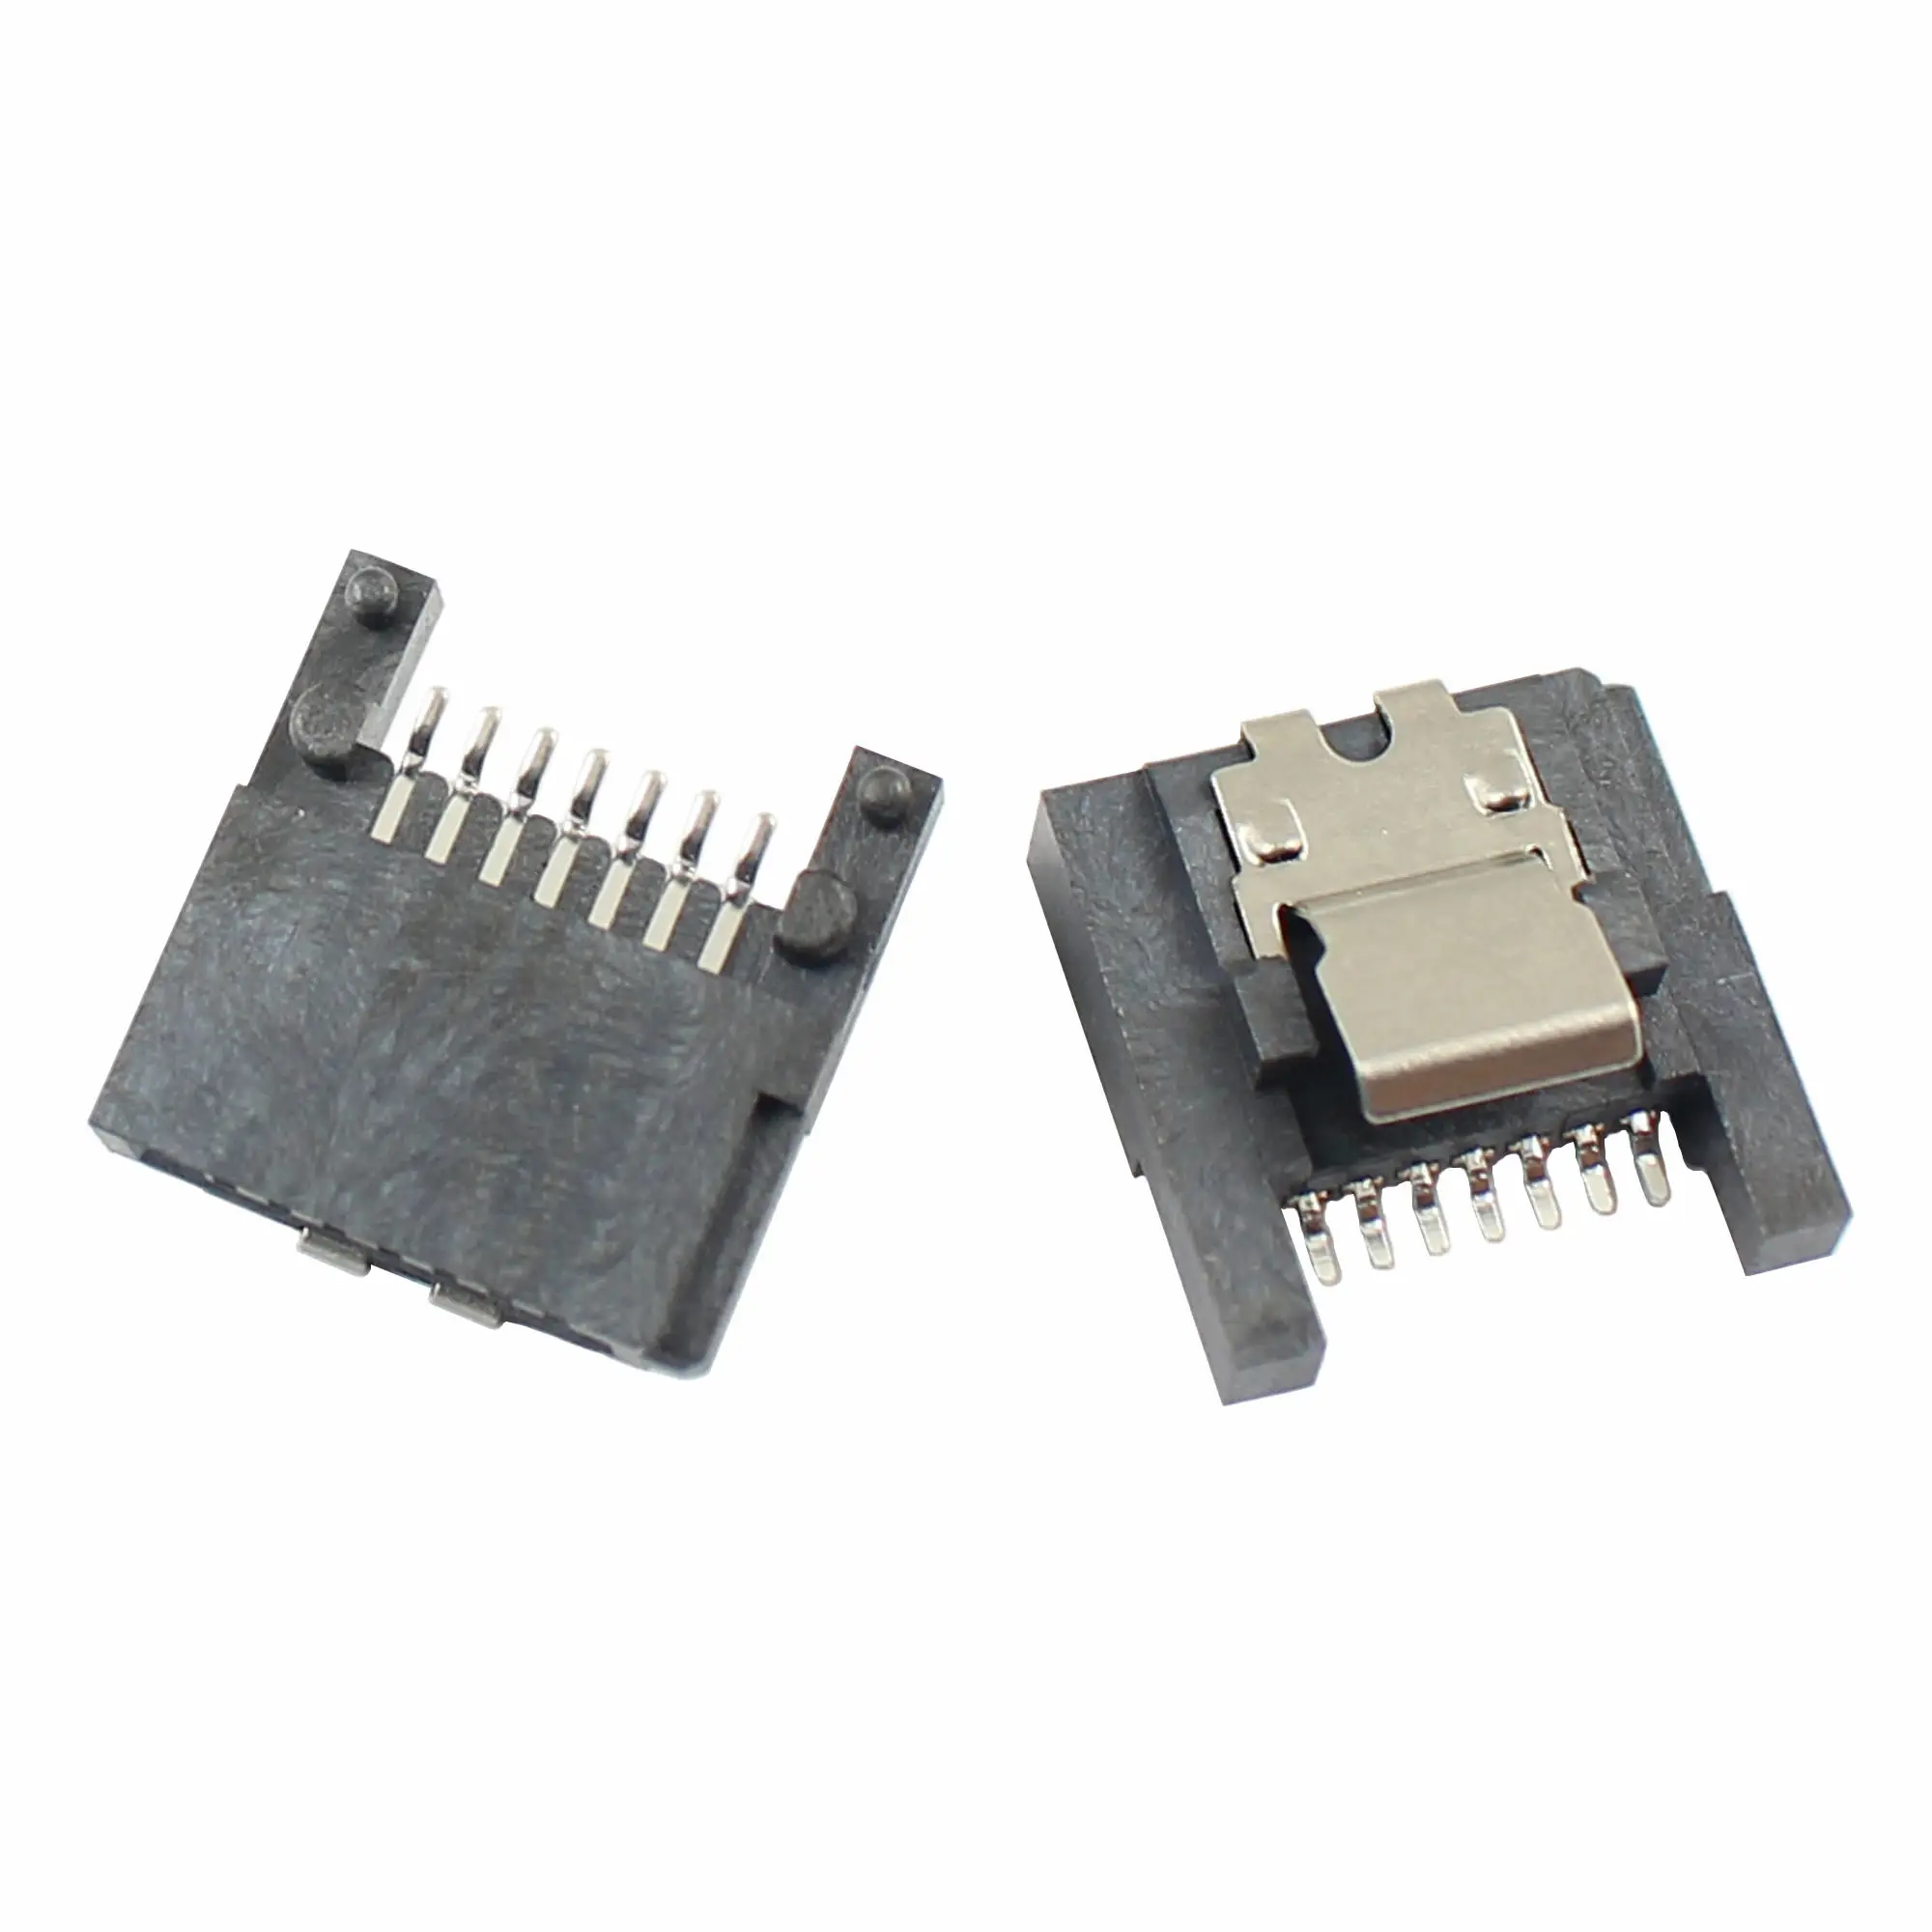 Sata 7 Pin SMT SMD Female Straight Adapter Connector For Hard Drive HDD